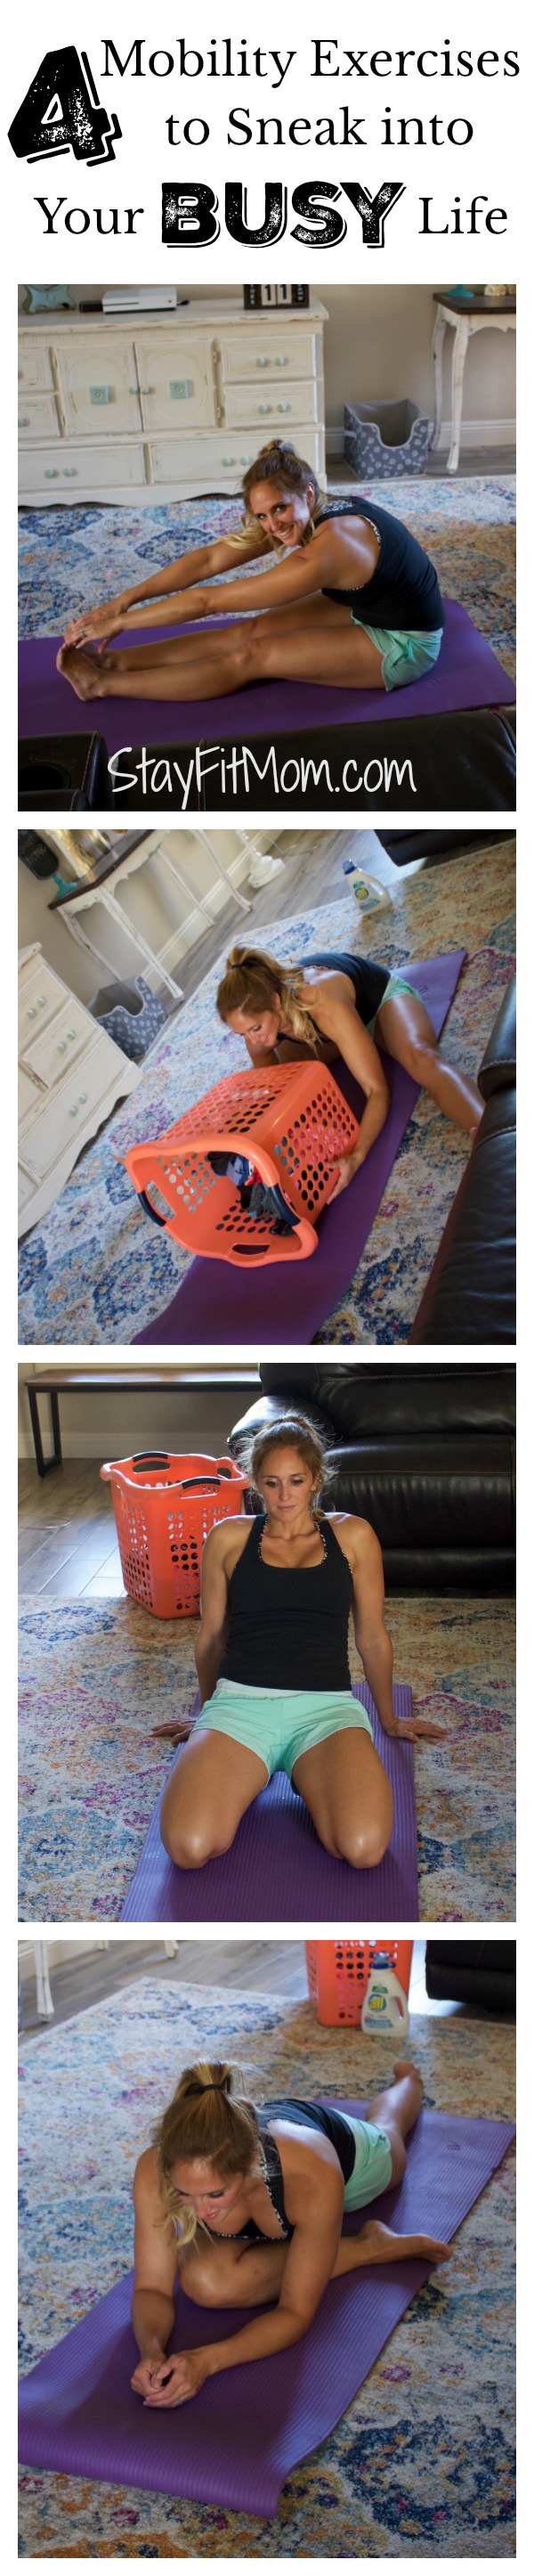 4 Mobility Exercises to Sneak Into Your Busy Life by StayFitMom.com.